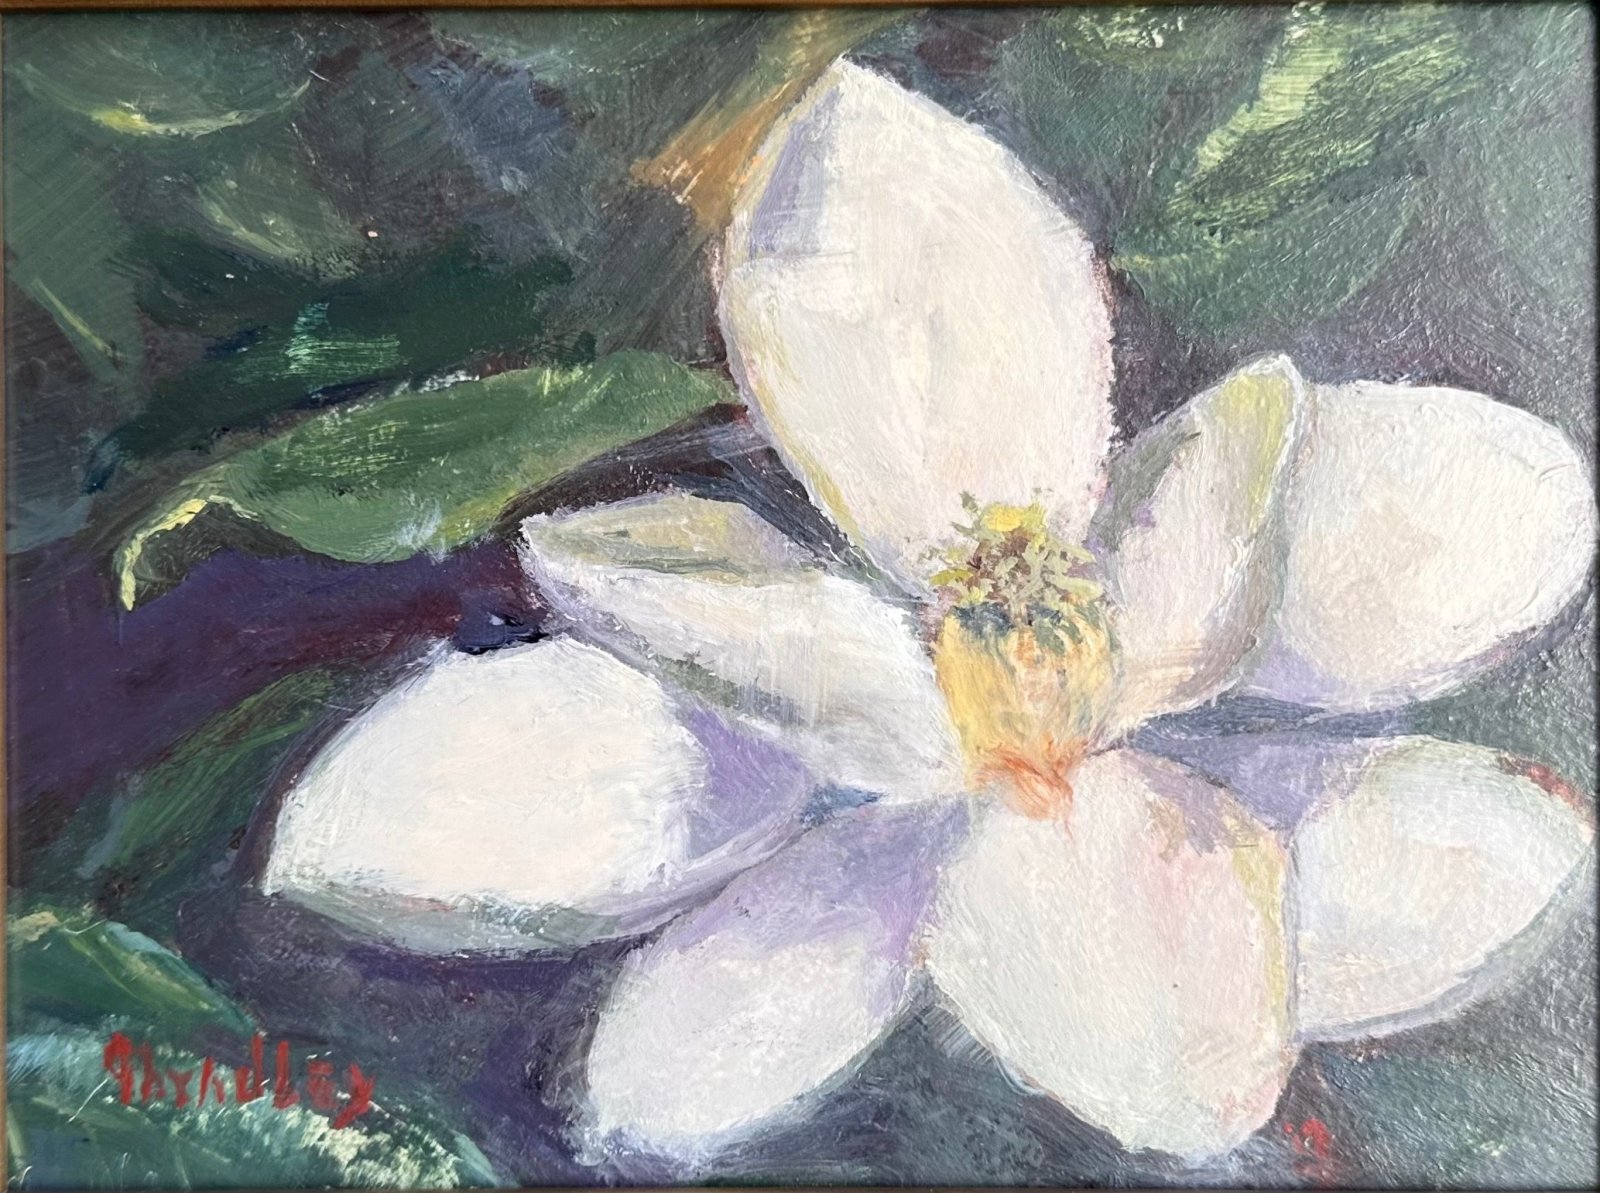 Sweet Magnolia by Gary Bradley at LePrince Galleries